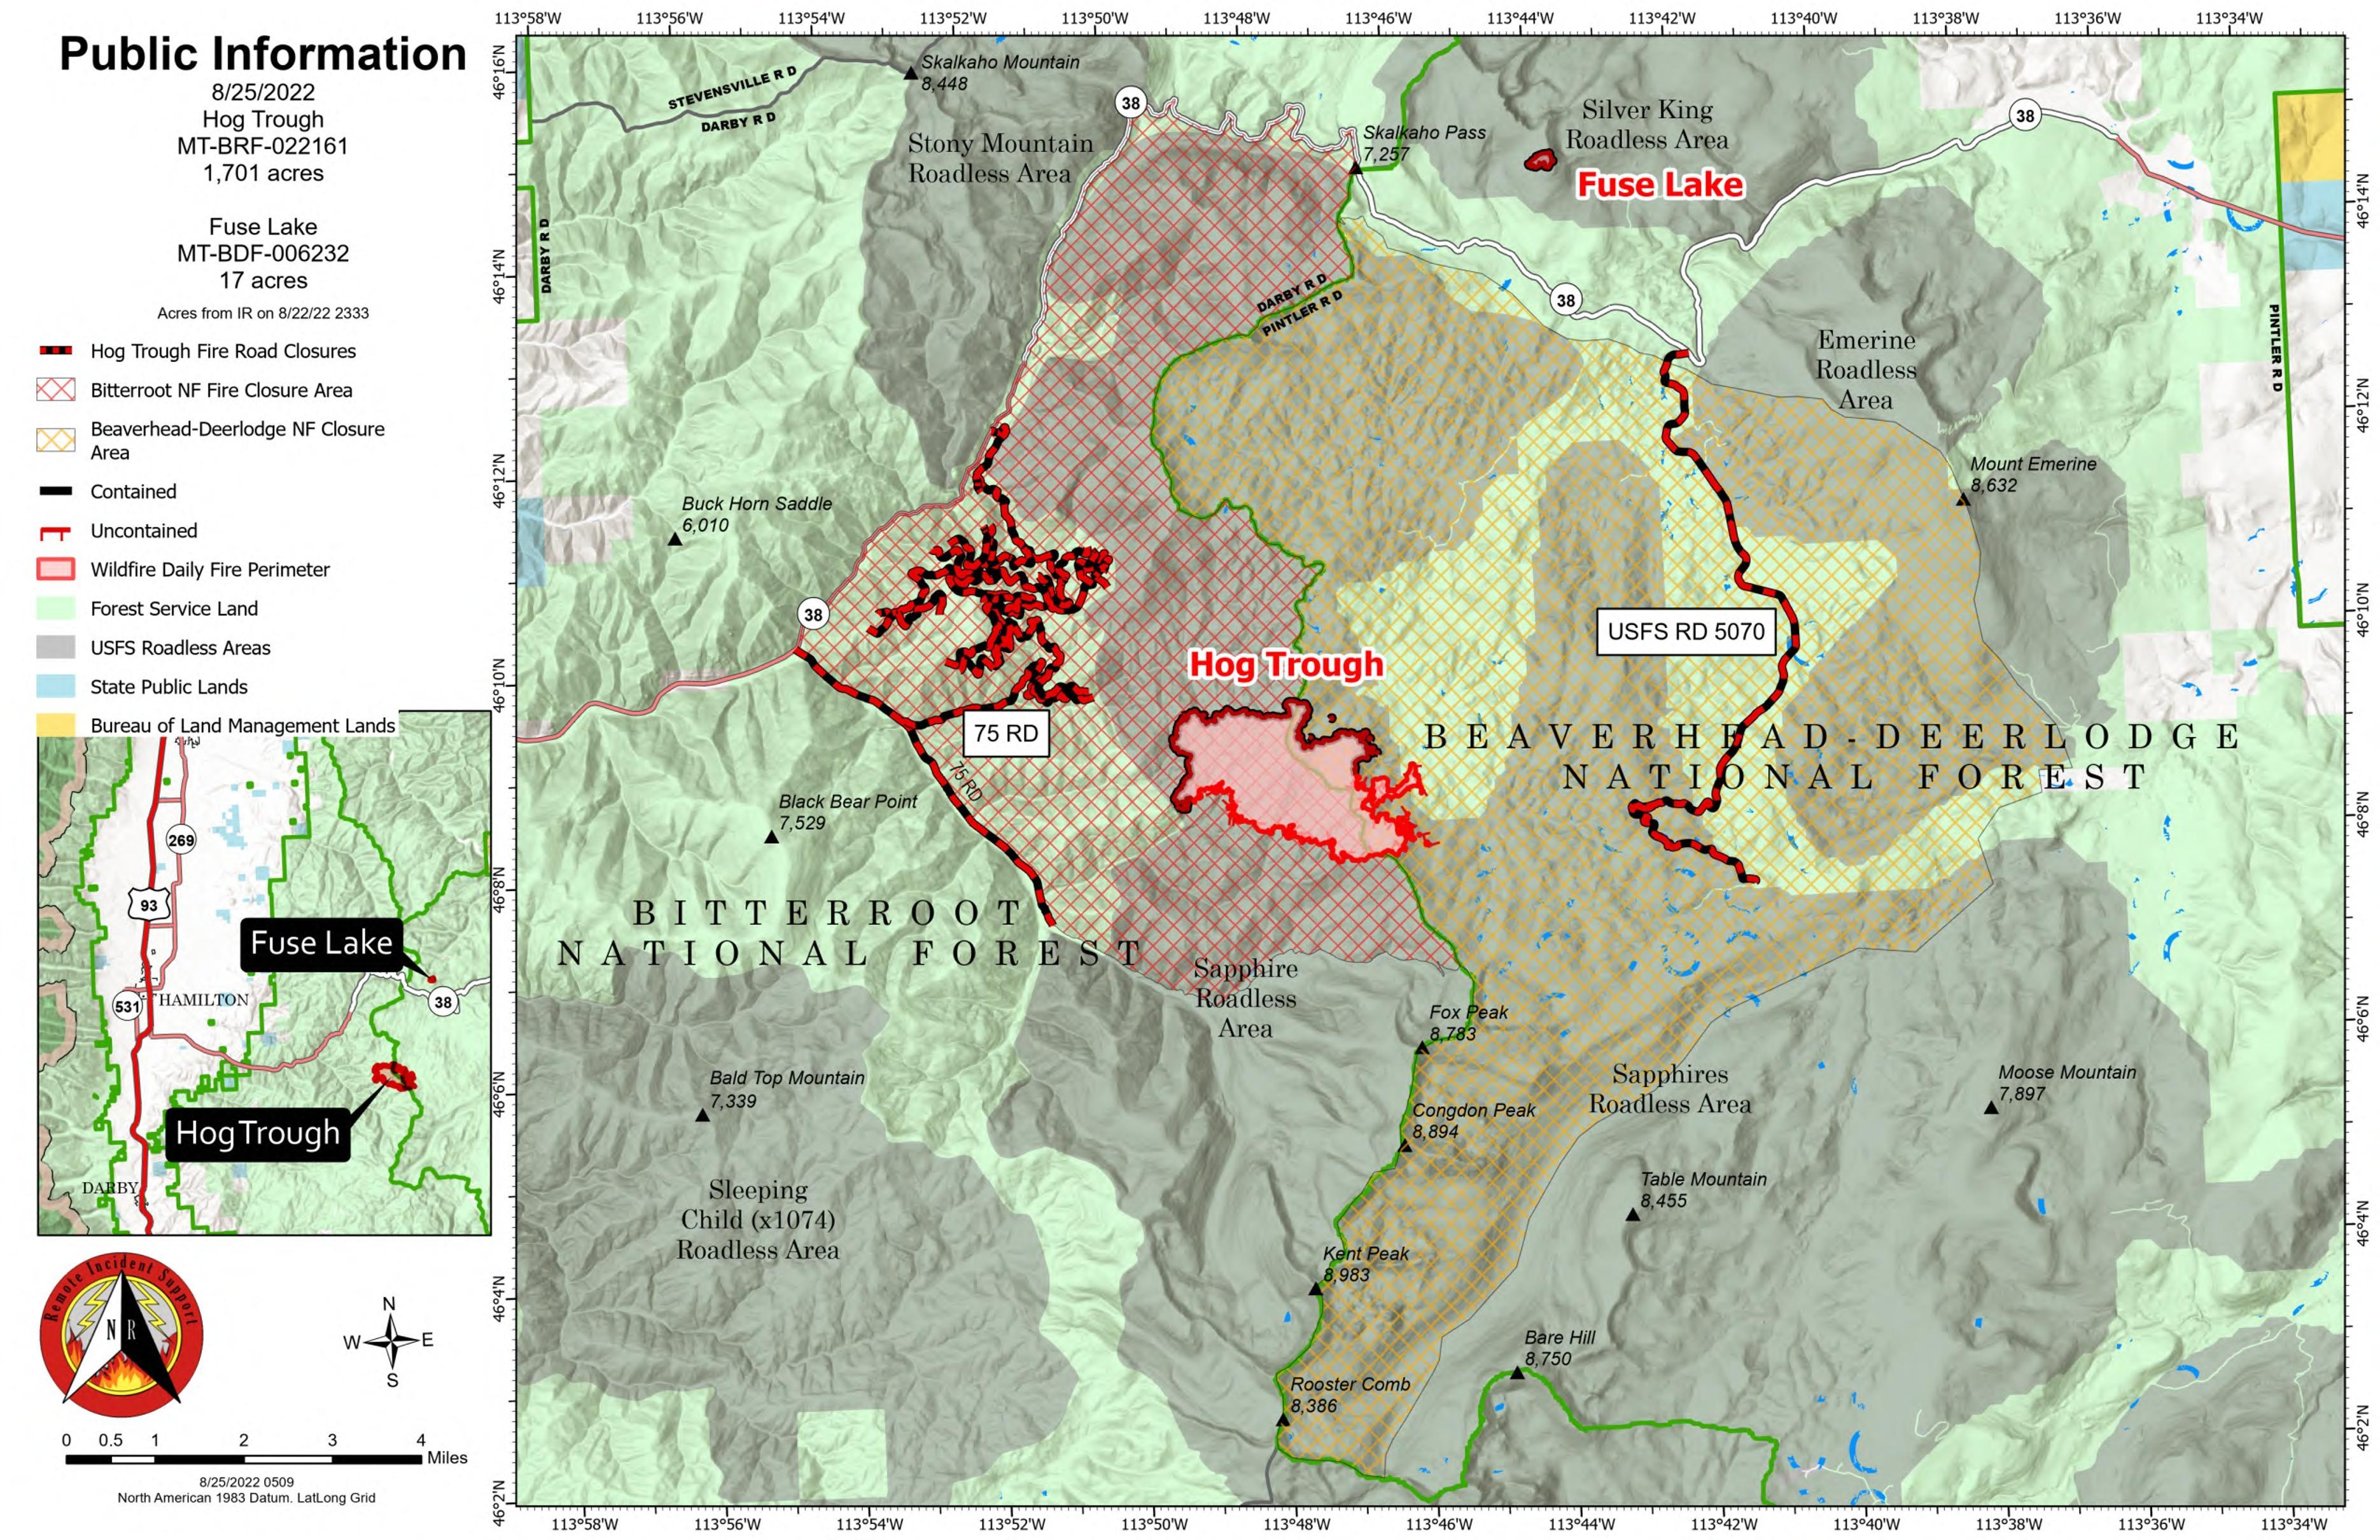 Hog Trough fire map for August 25, 2022